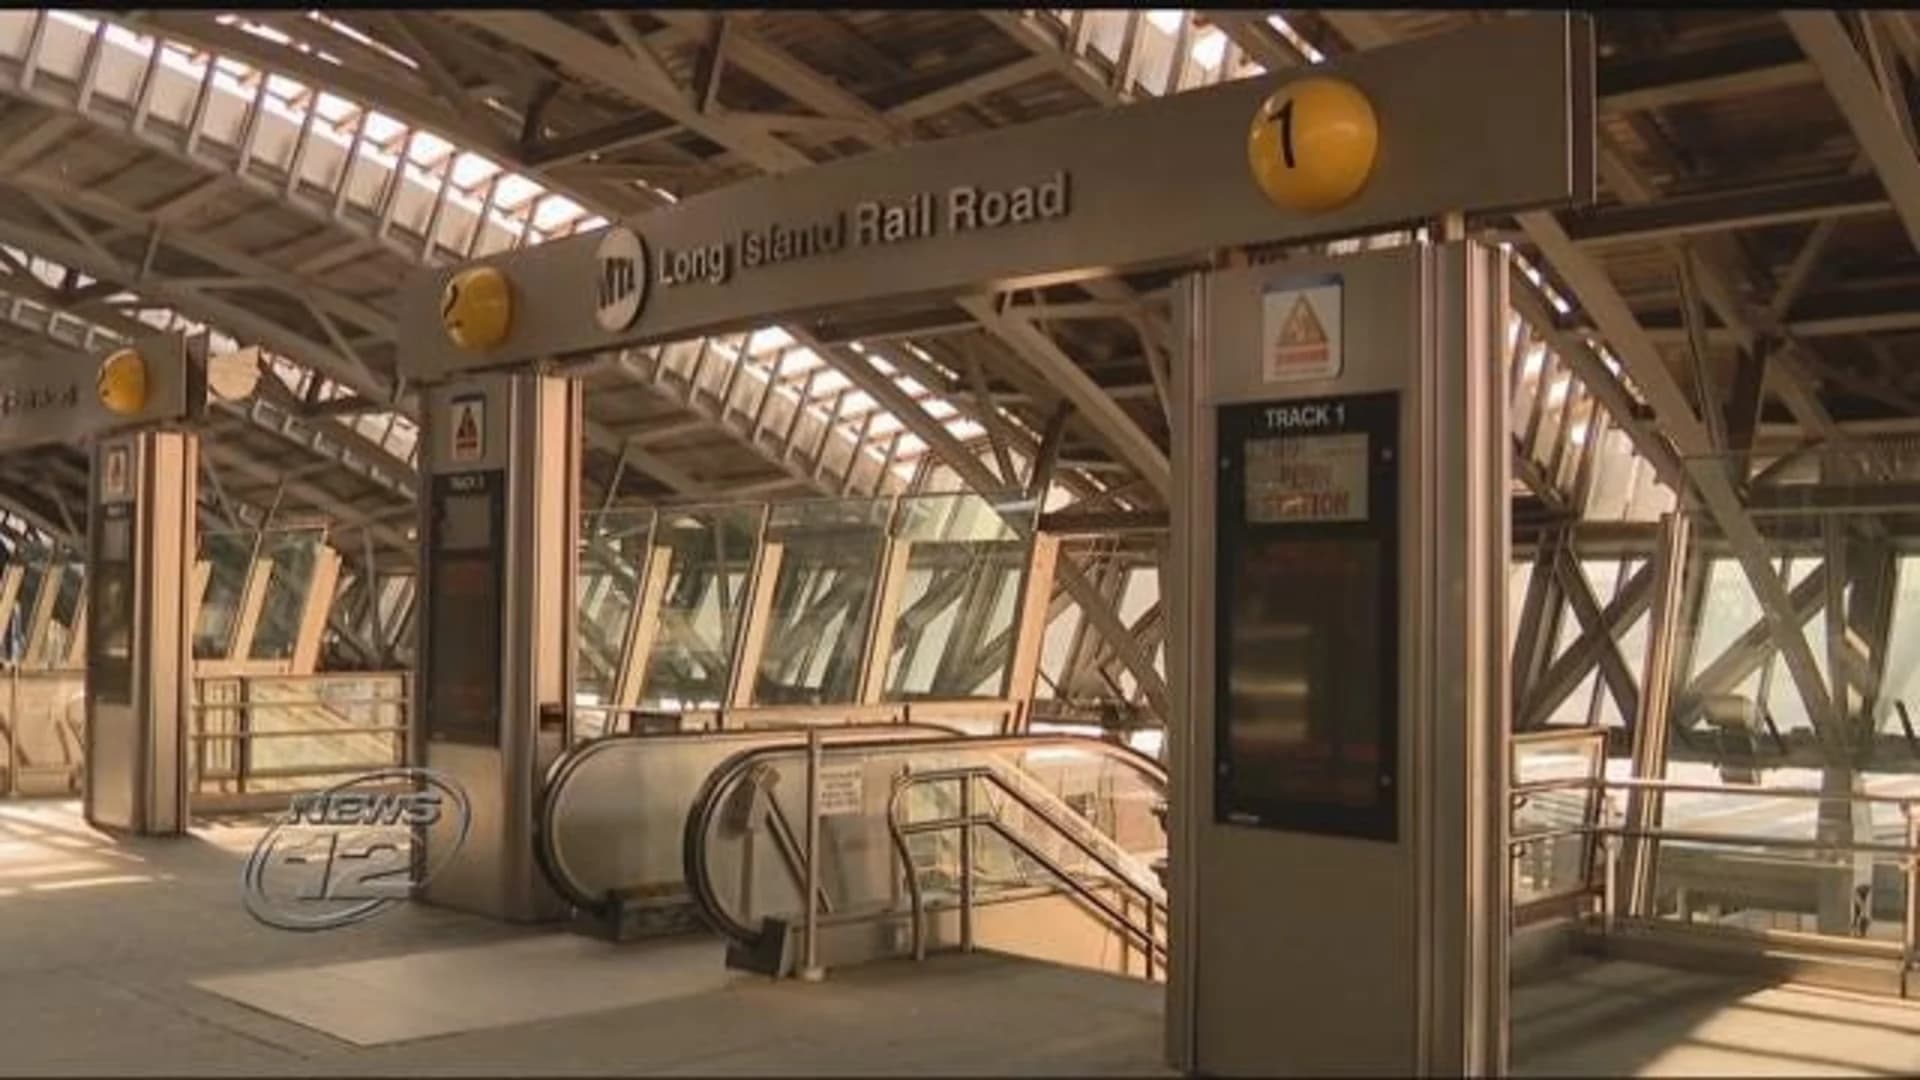 Comptroller: LIRR doesn't follow own procedure during service disruptions